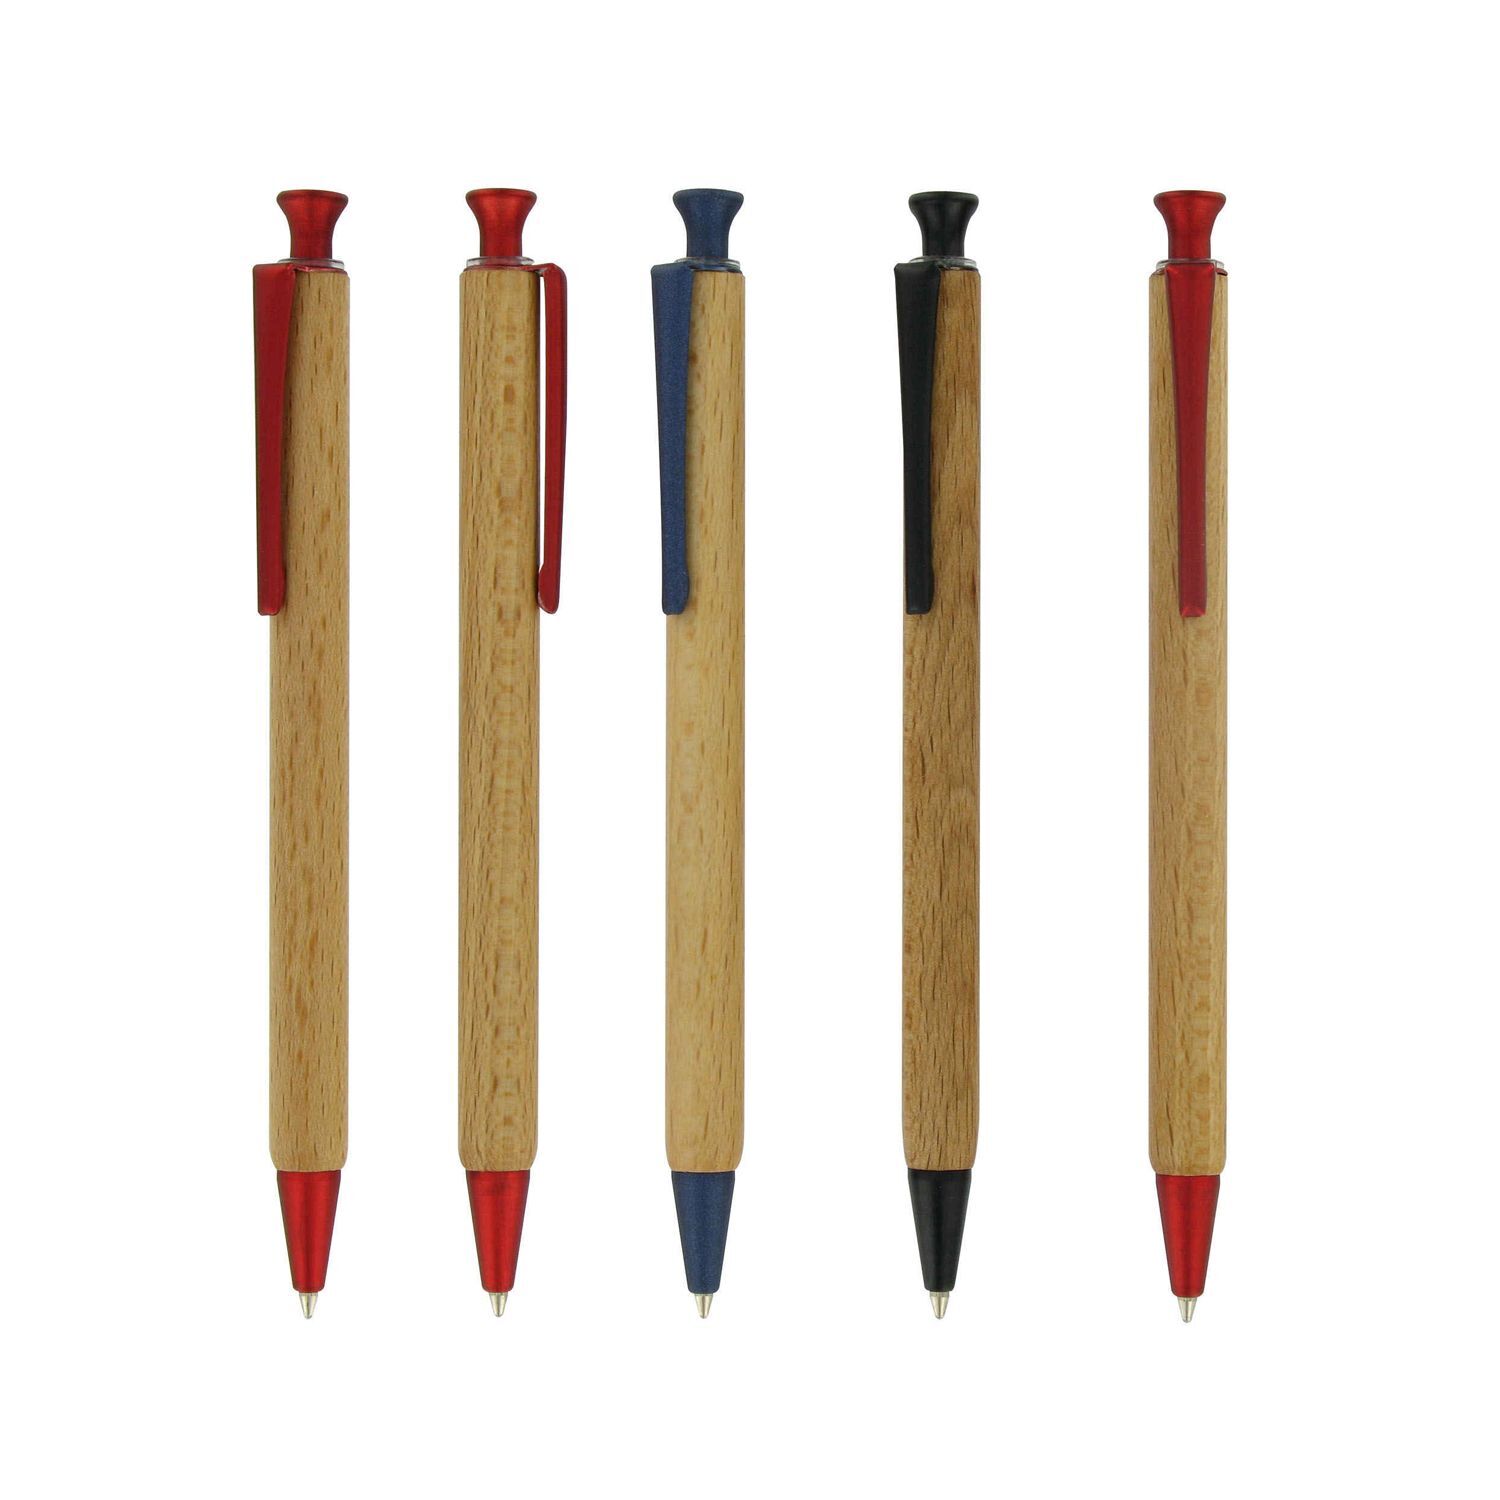 Pen made from Sustainable Wood